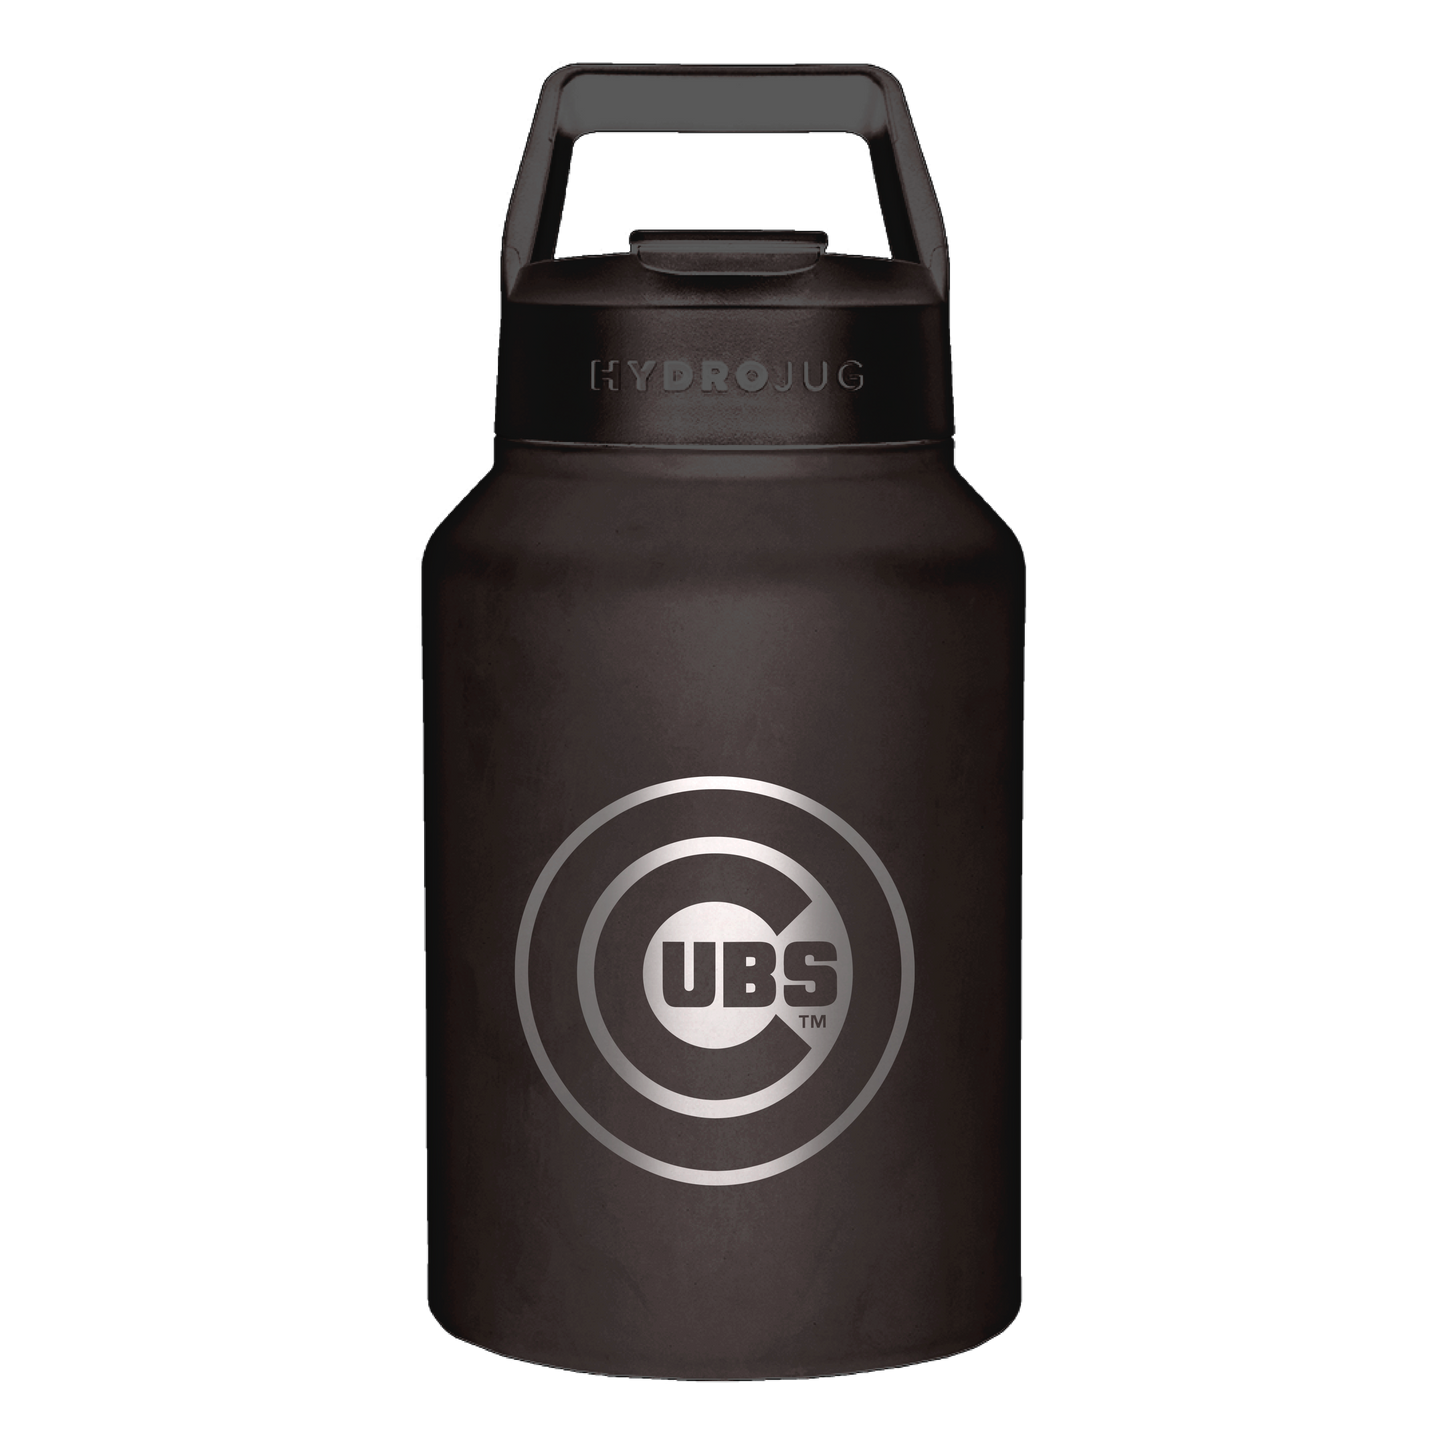 Chicago Cubs Stainless Steel Jug